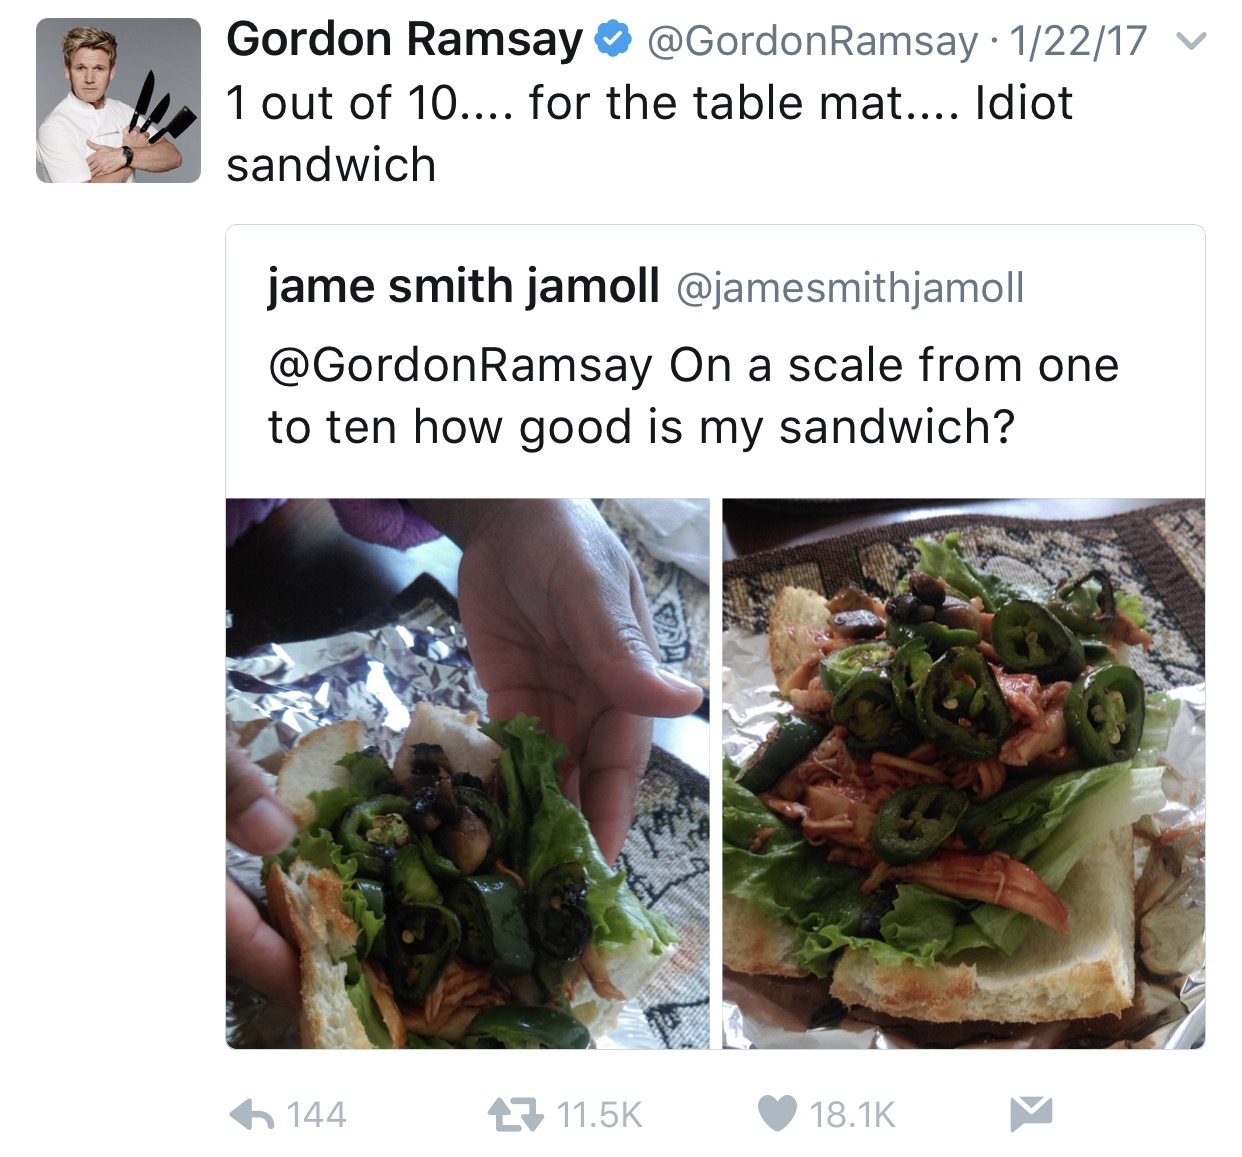 Gordon Ramsay Savagely Rates Peoples Food On Twitter - Funny Gallery